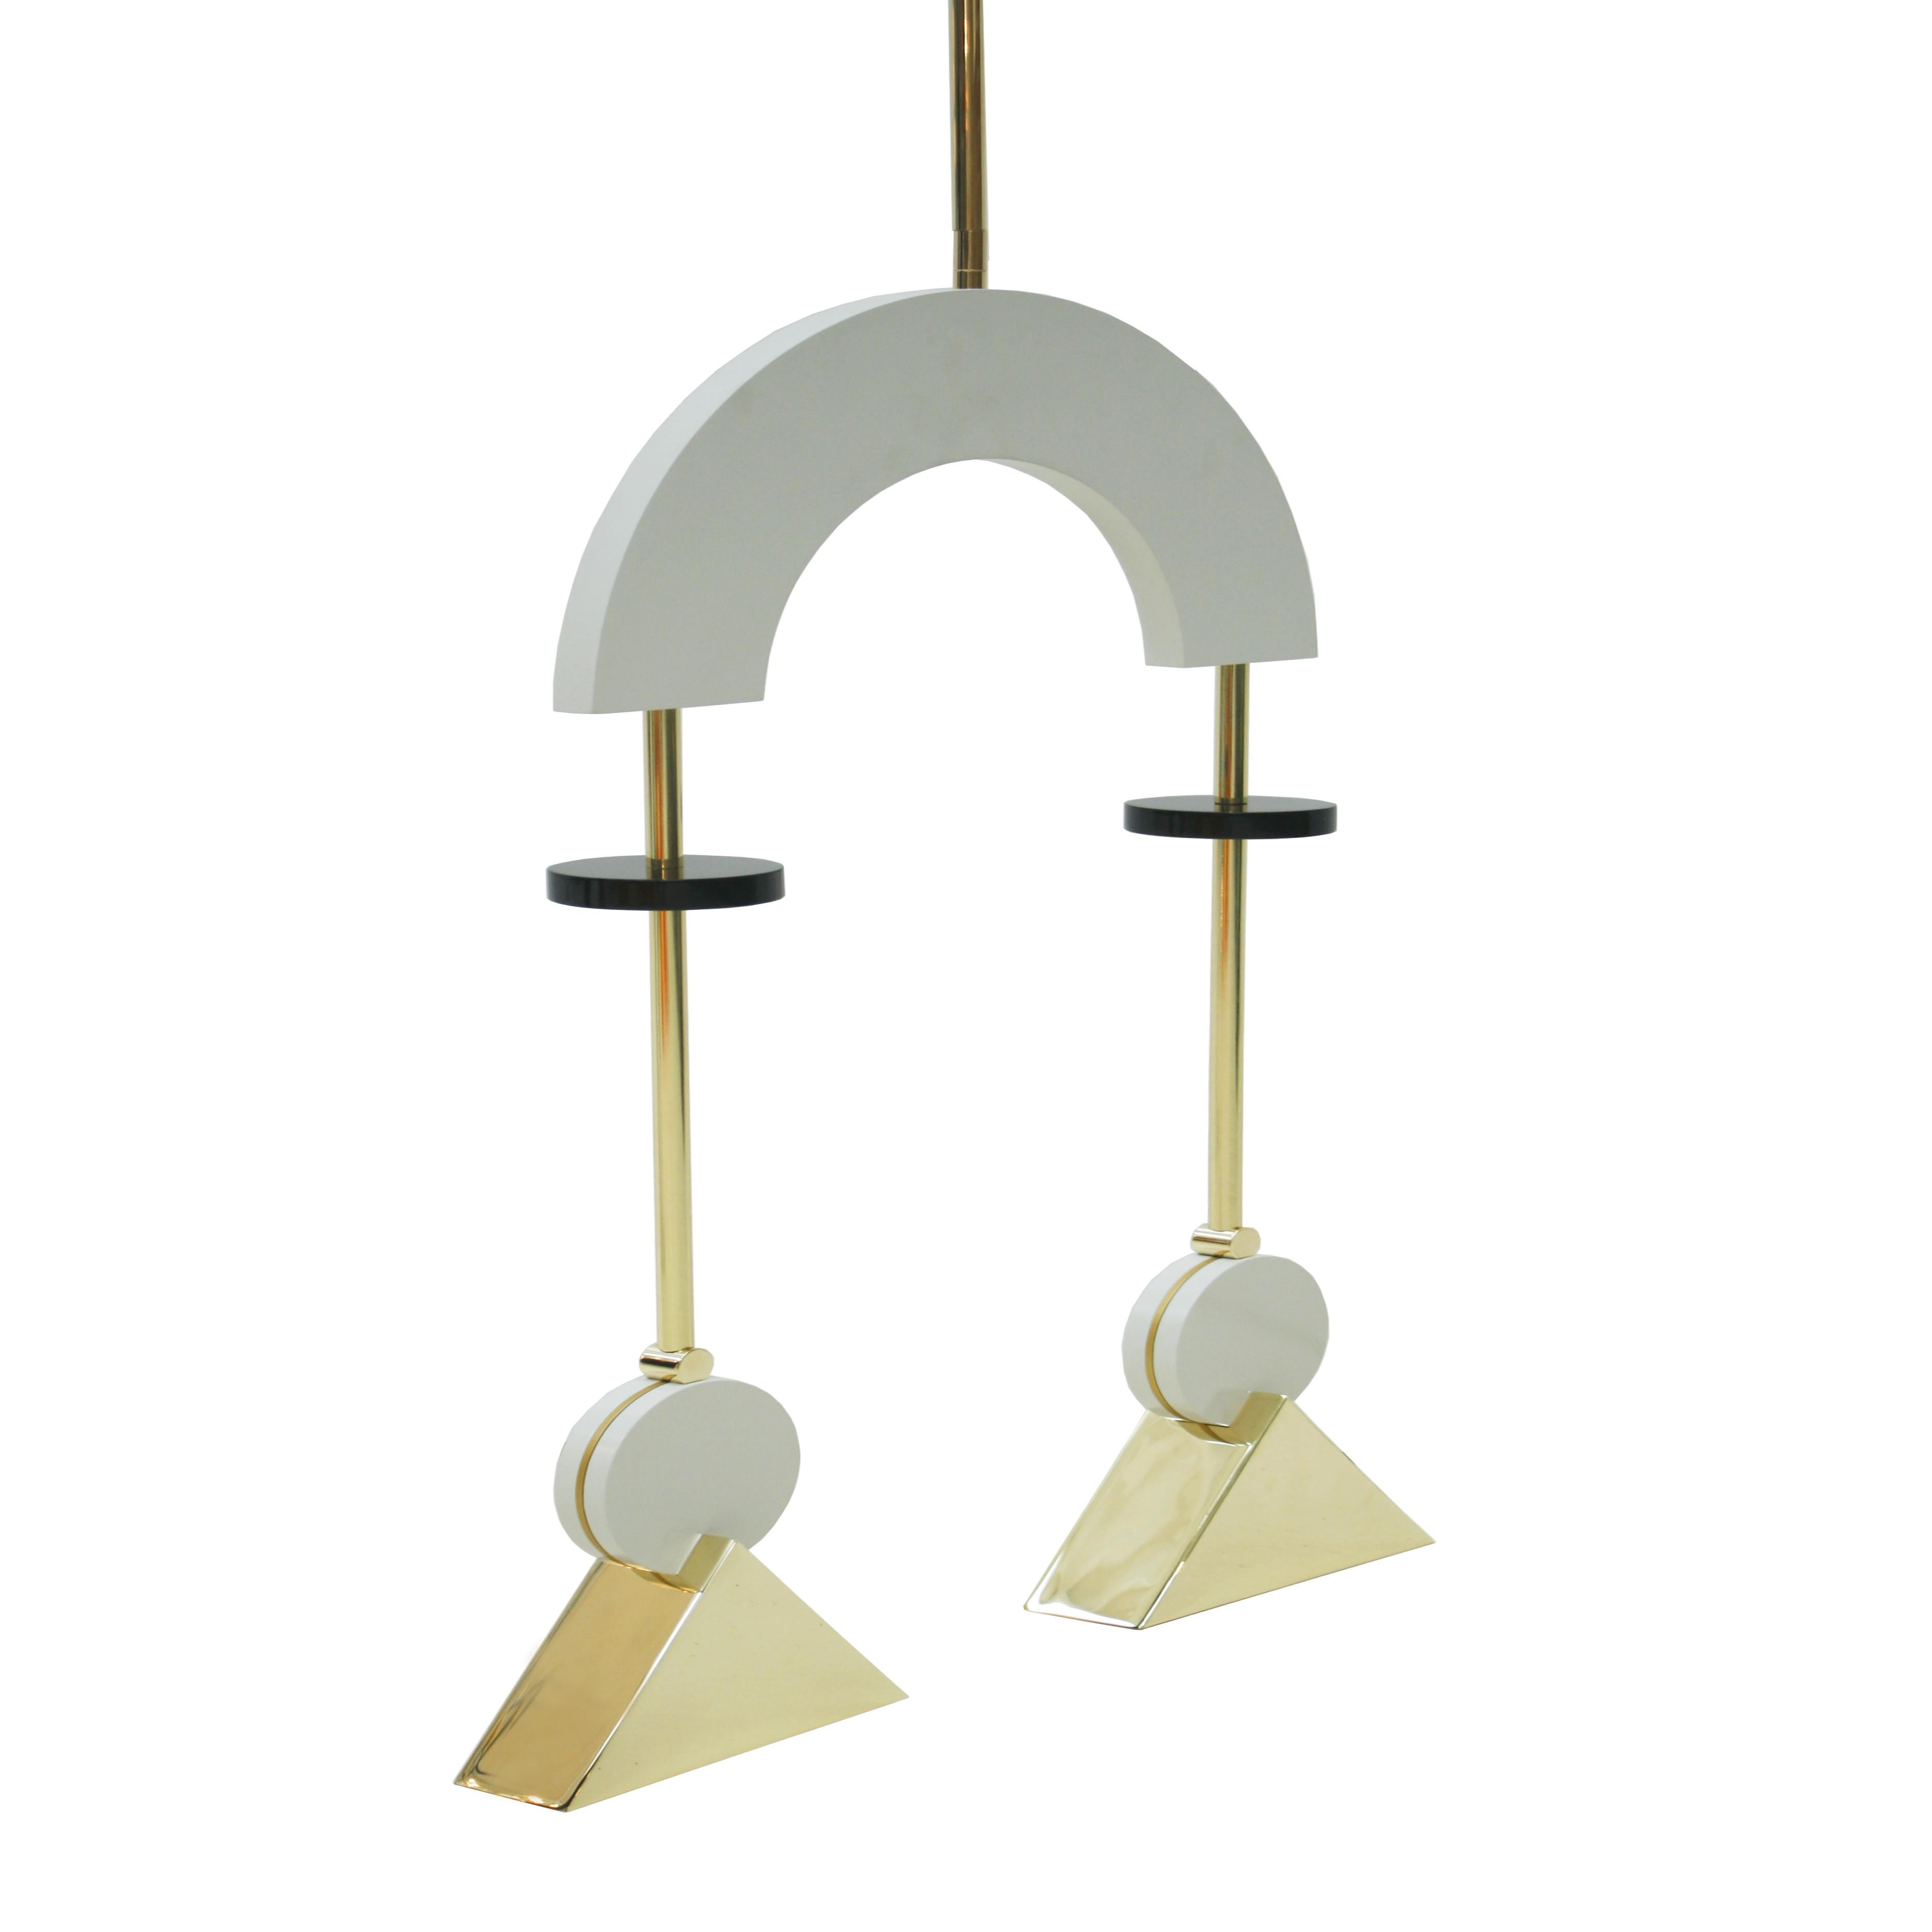 British Mid-Century Modern Style White Lacquered Wood and Bronze Pendant Lamps For Sale